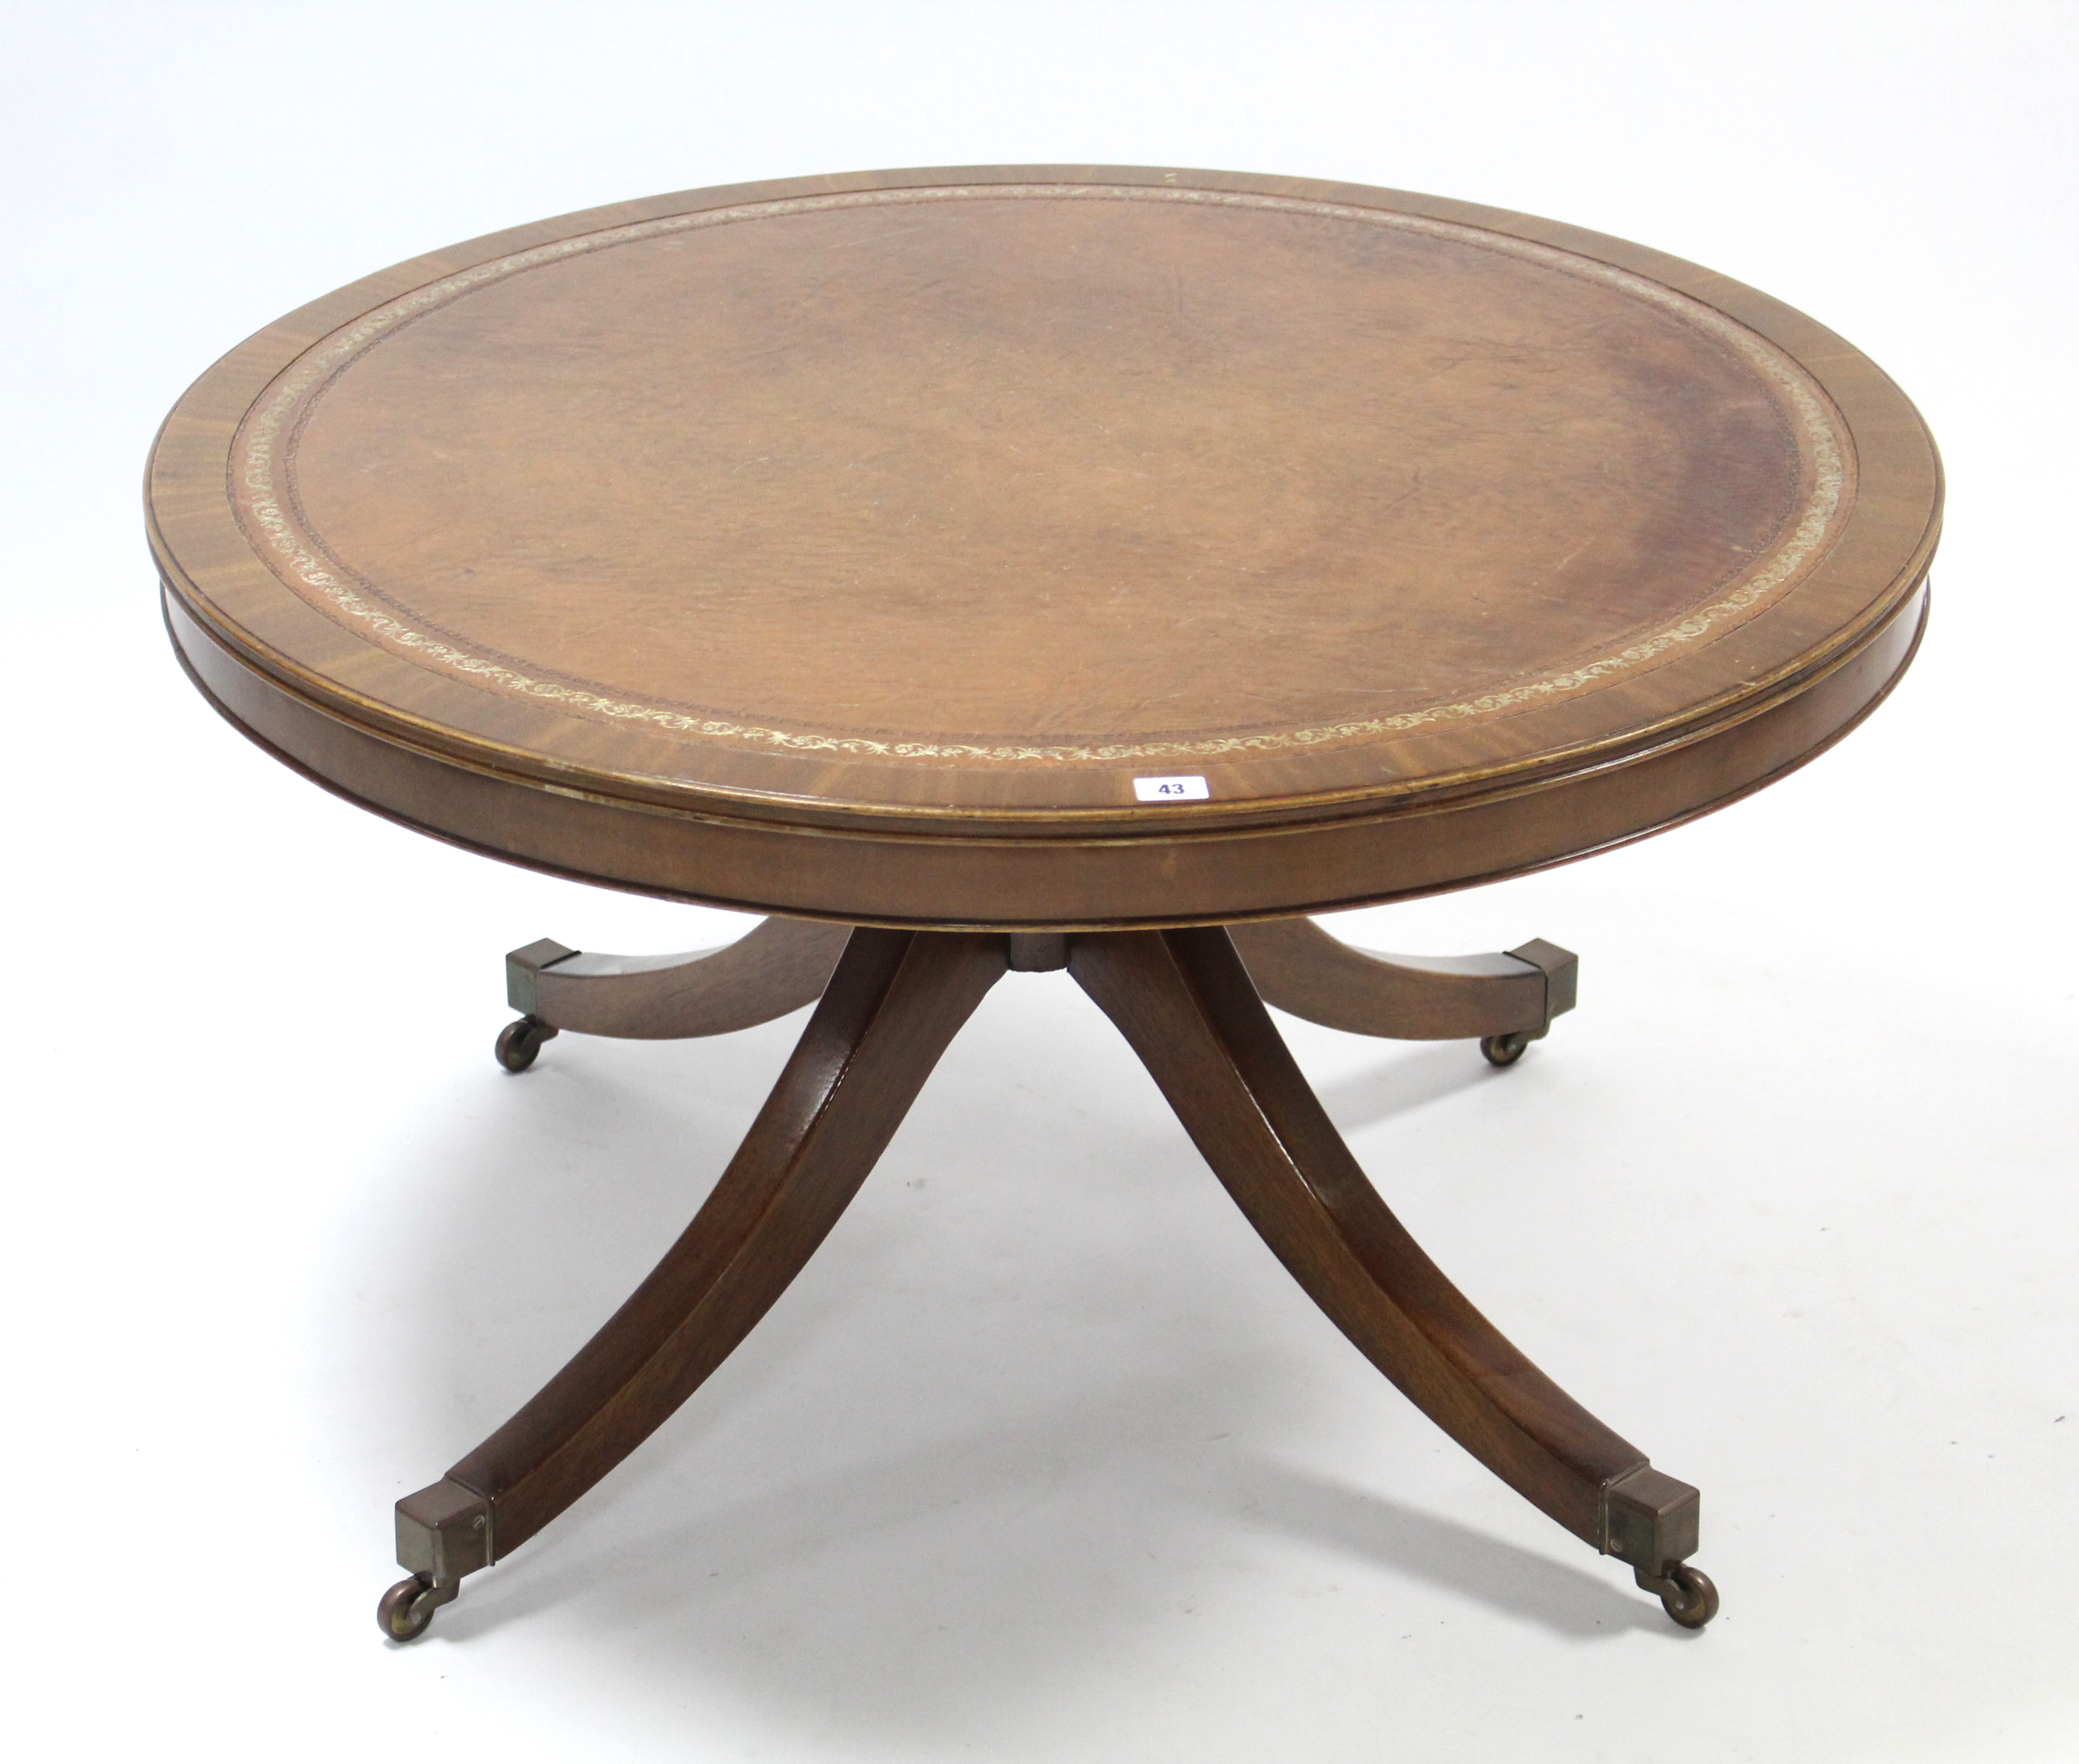 A reproduction mahogany low coffee table, inset gilt-tooled brown leather to the circular top, &